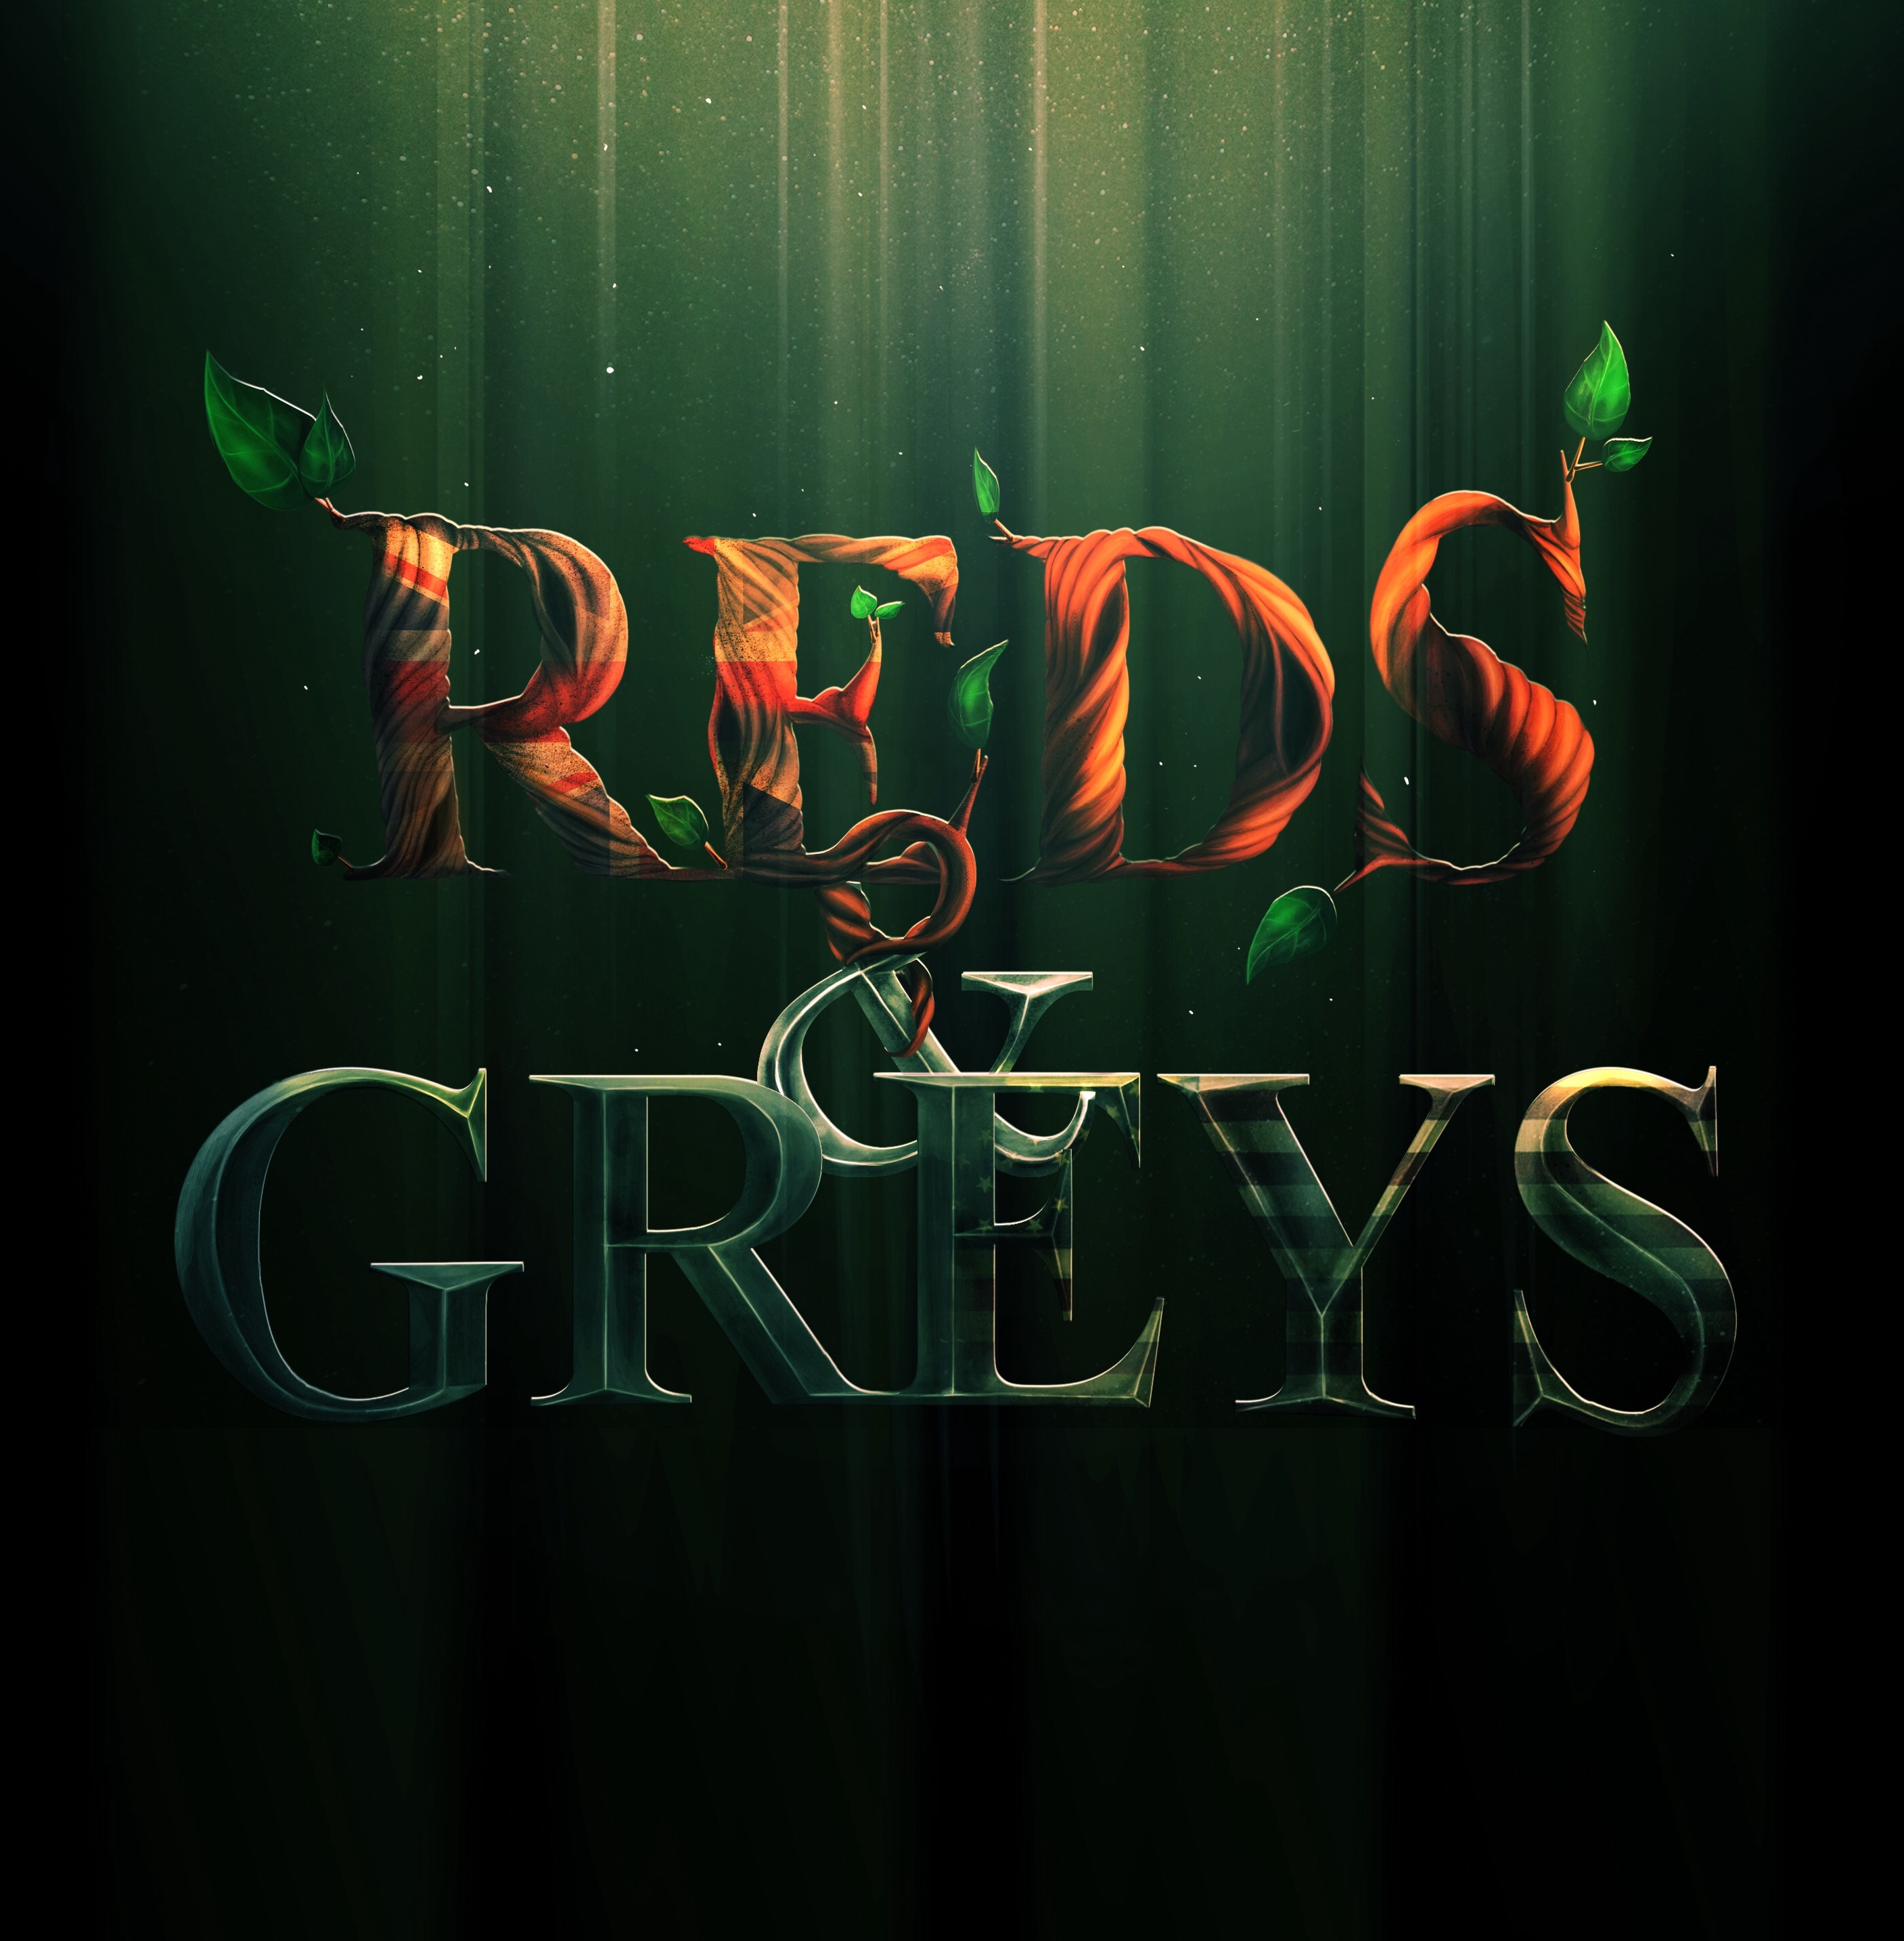 Reds and Grays update